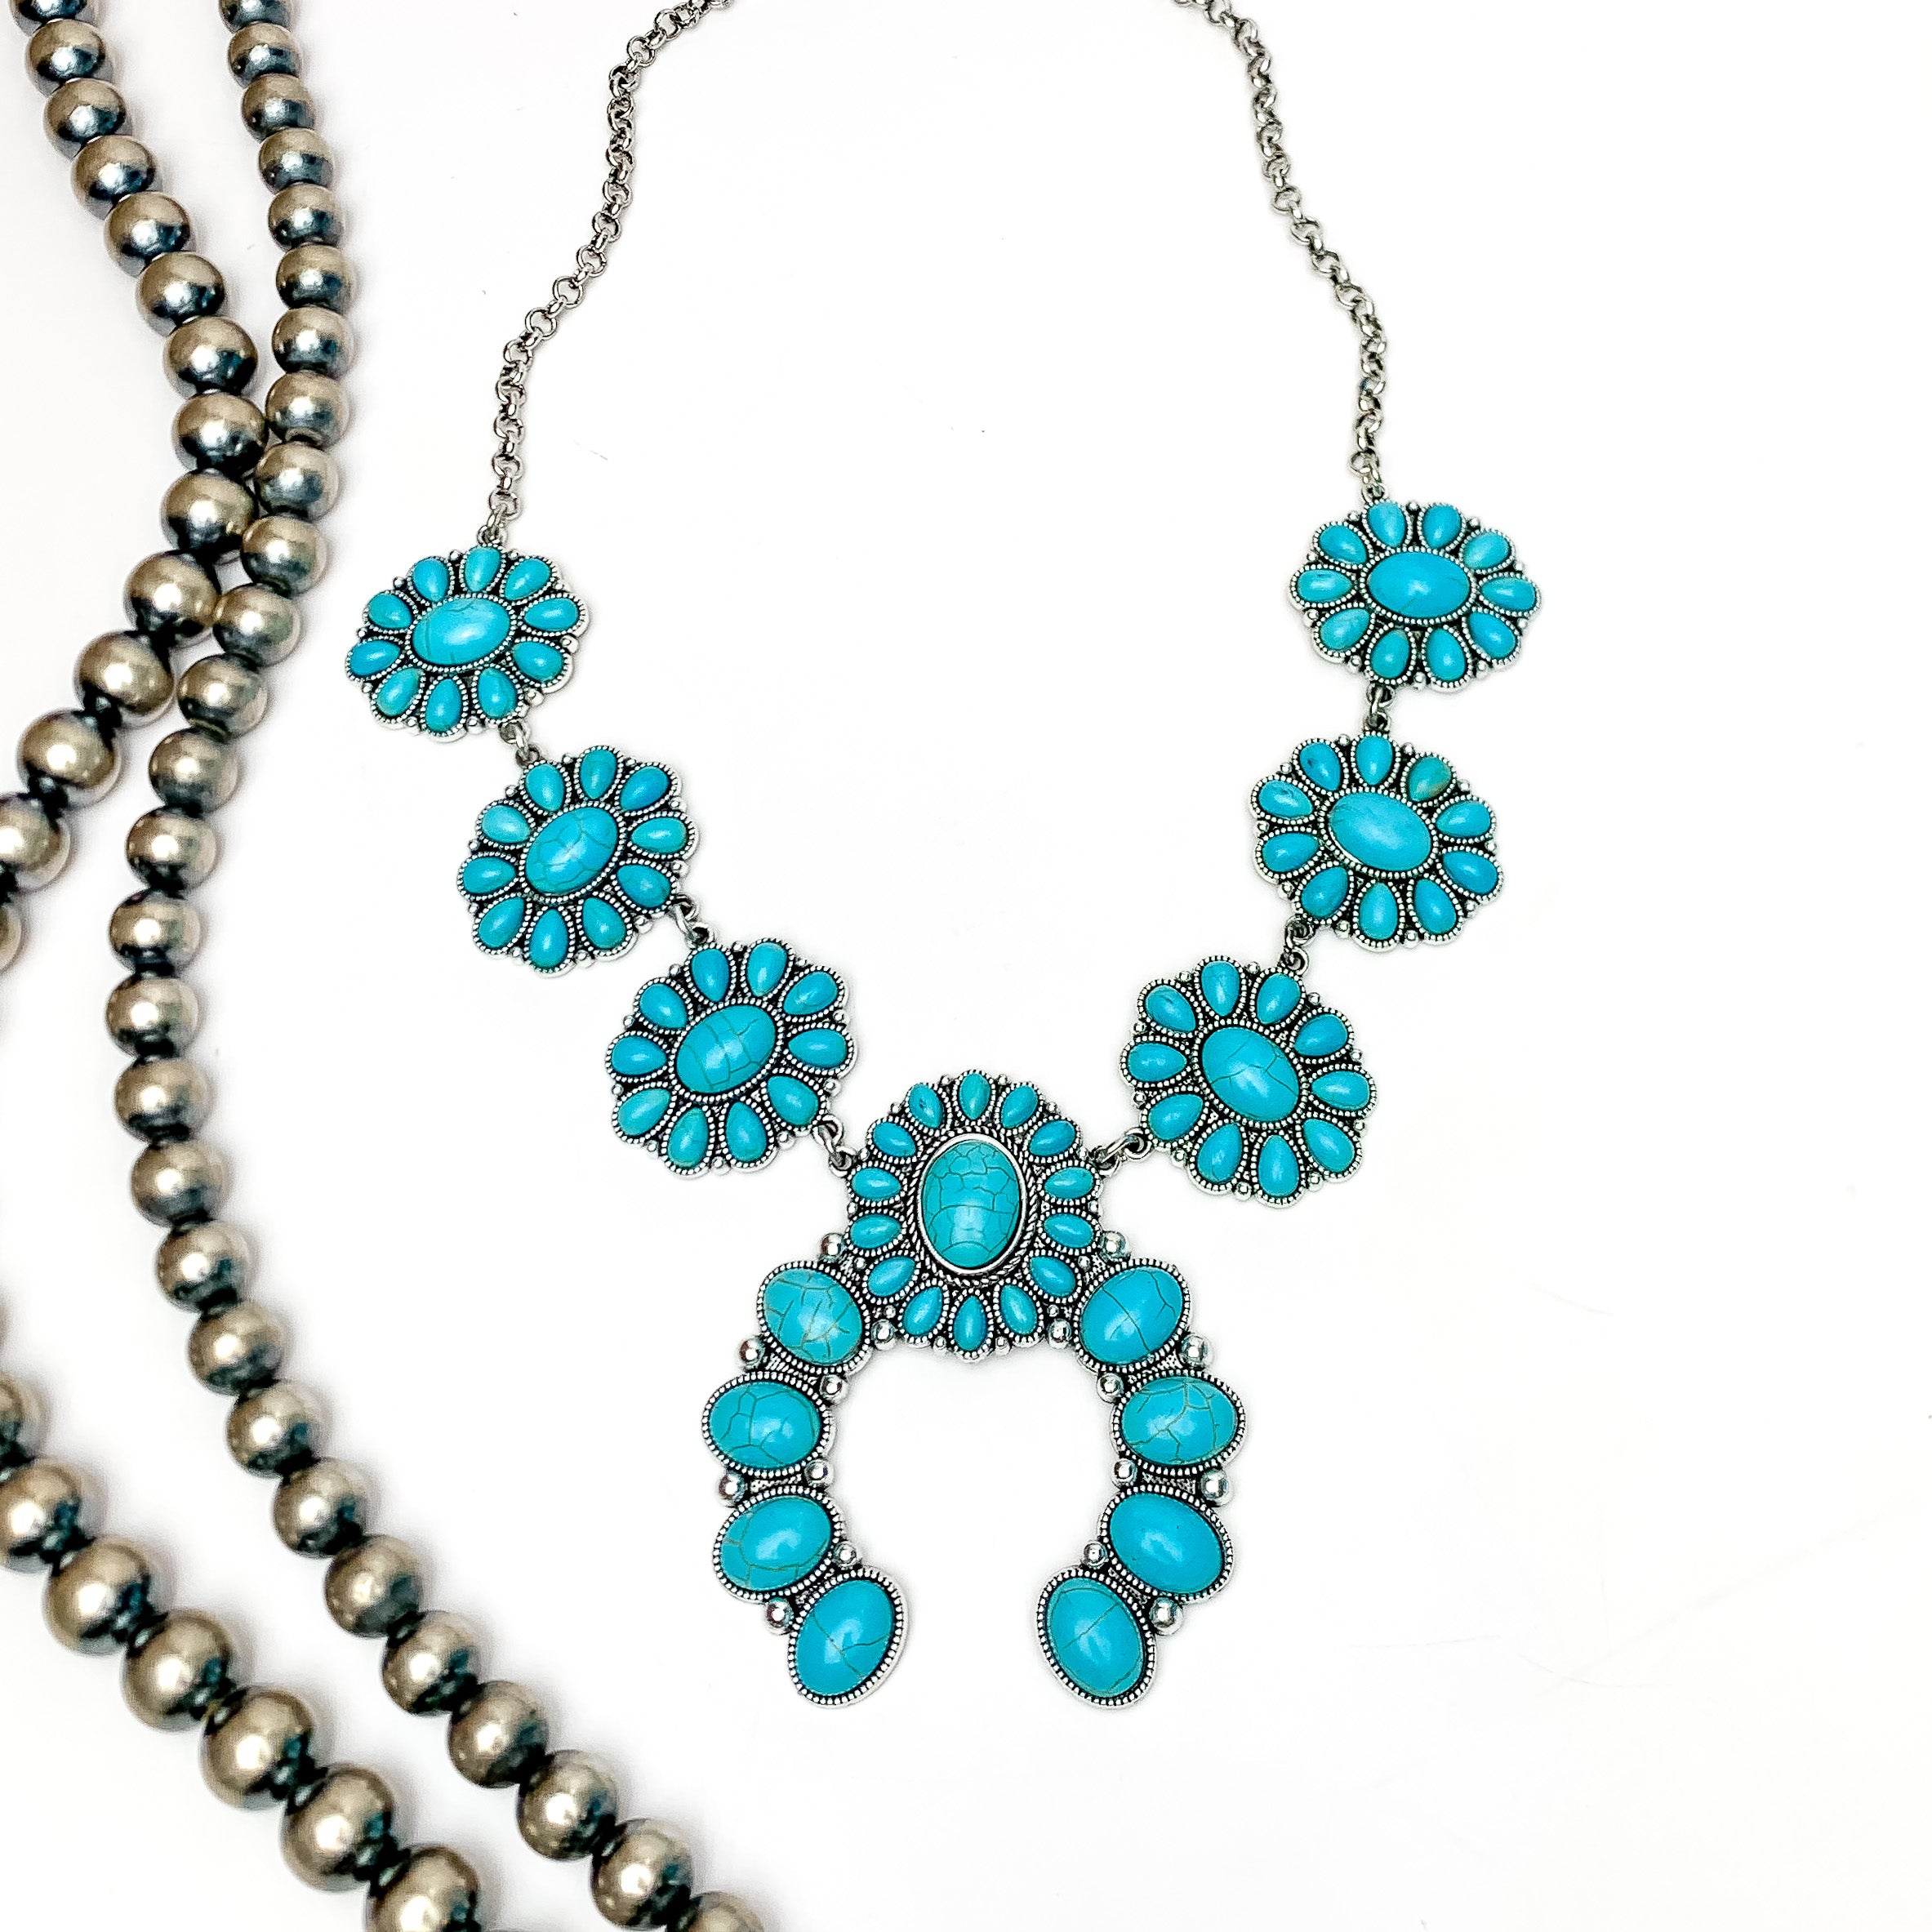 The Western Way Squash Blossom Necklace in Turquoise Blue. Pictured on a white background with Navajo beads on the left.